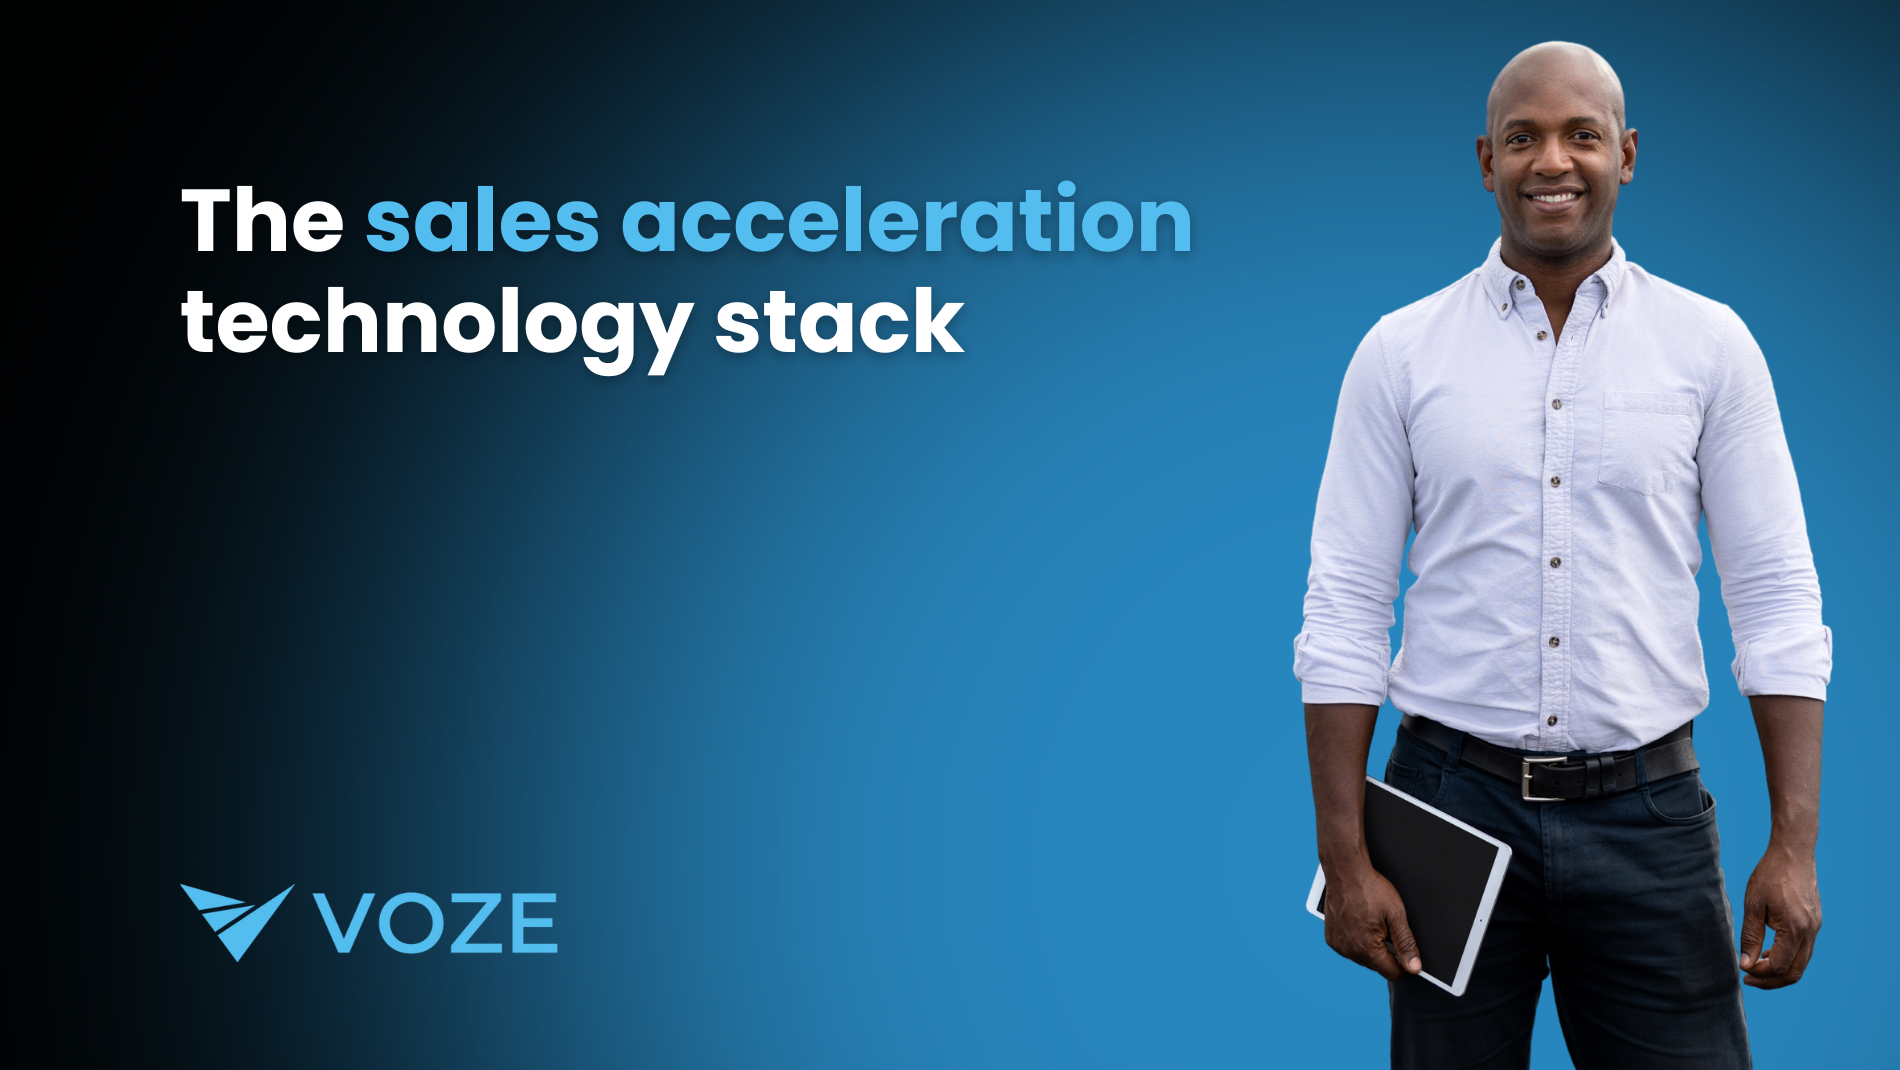 The sales acceleration technology stack